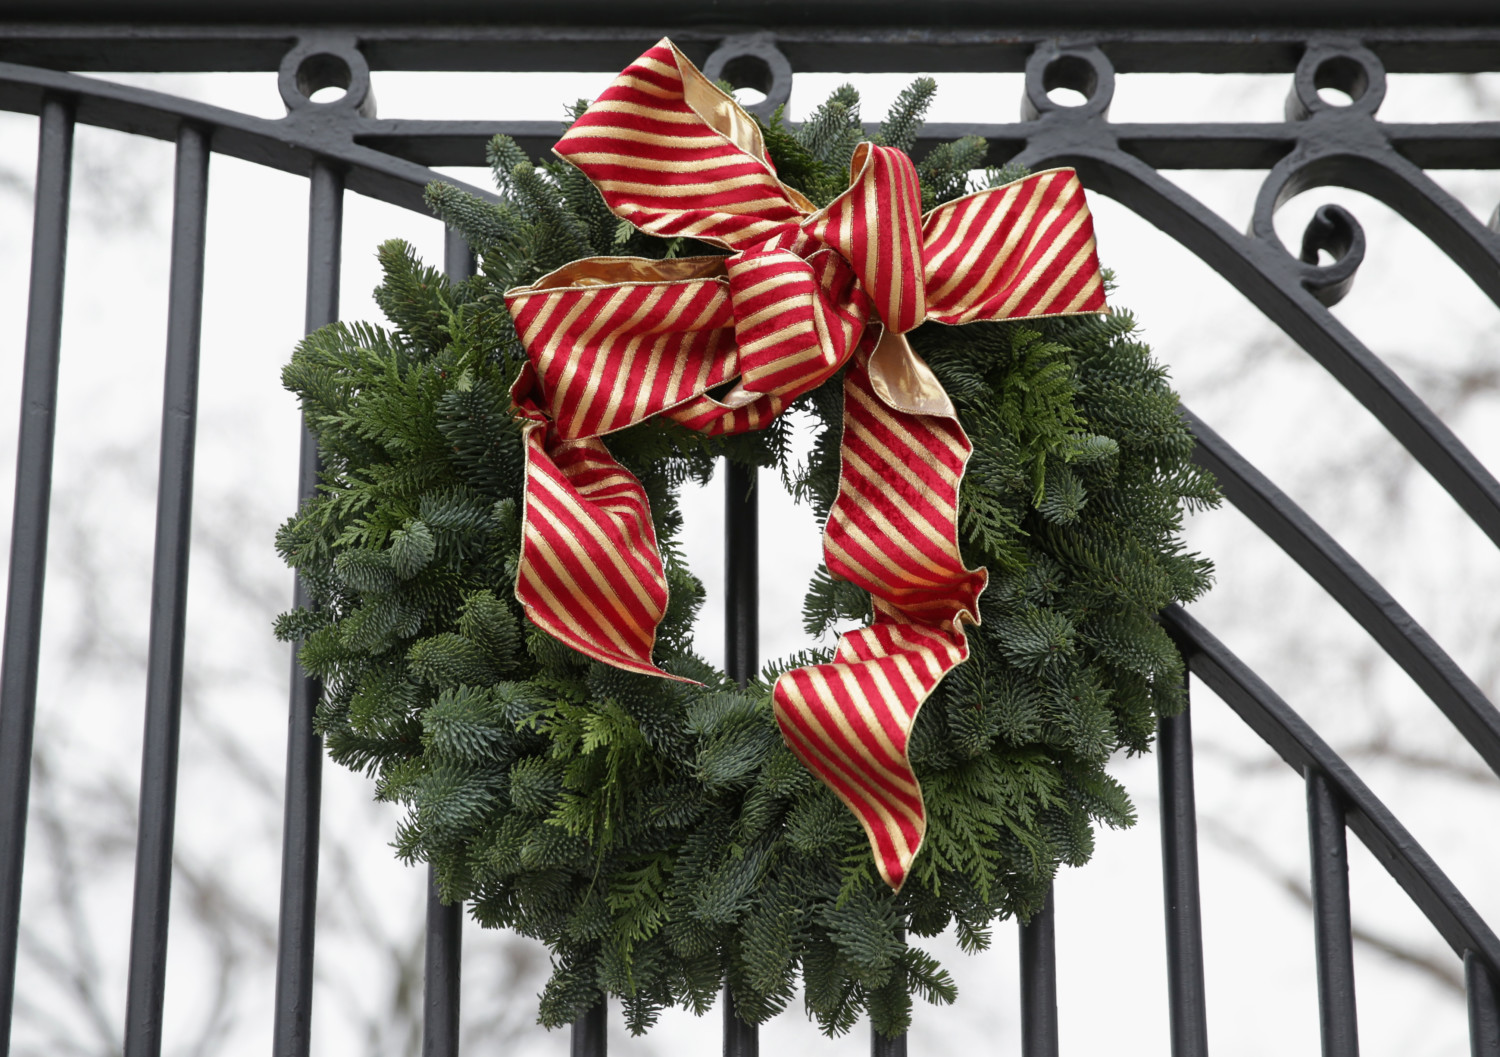 Michelle Obama Introduces 2013 White House Holiday Decorations